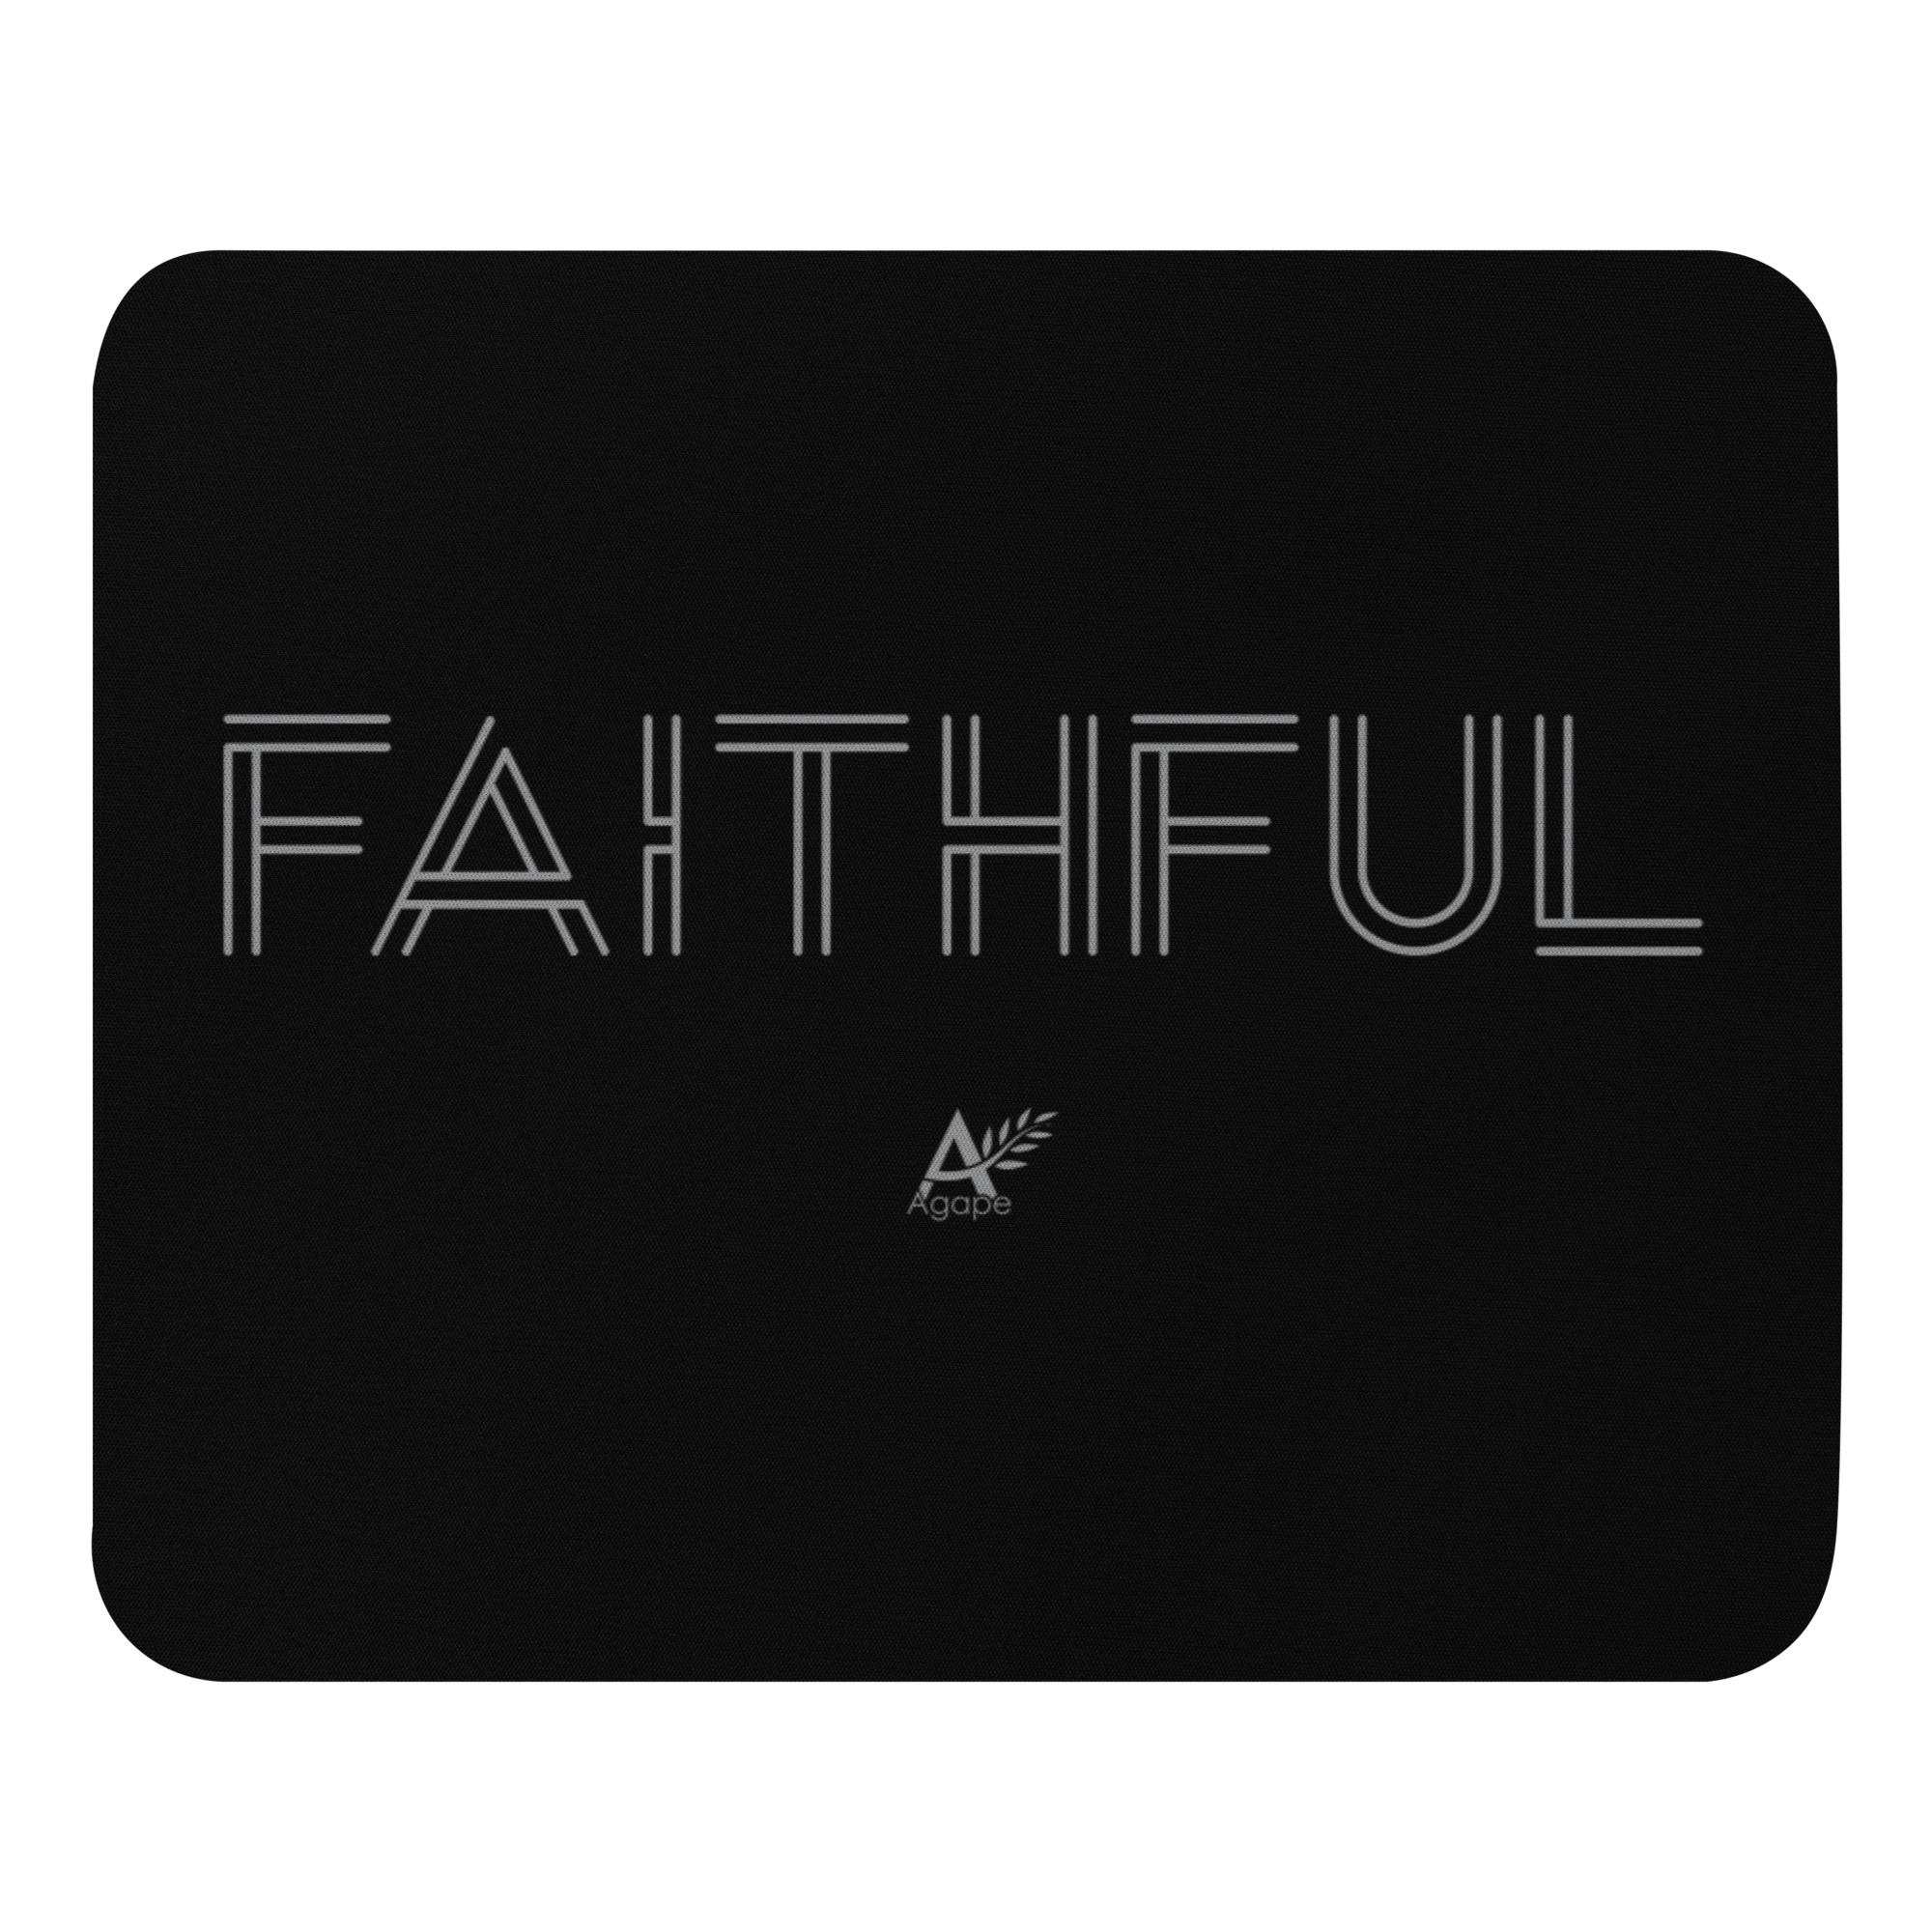 mouse-pad-white-front-63d848455f5db.jpg